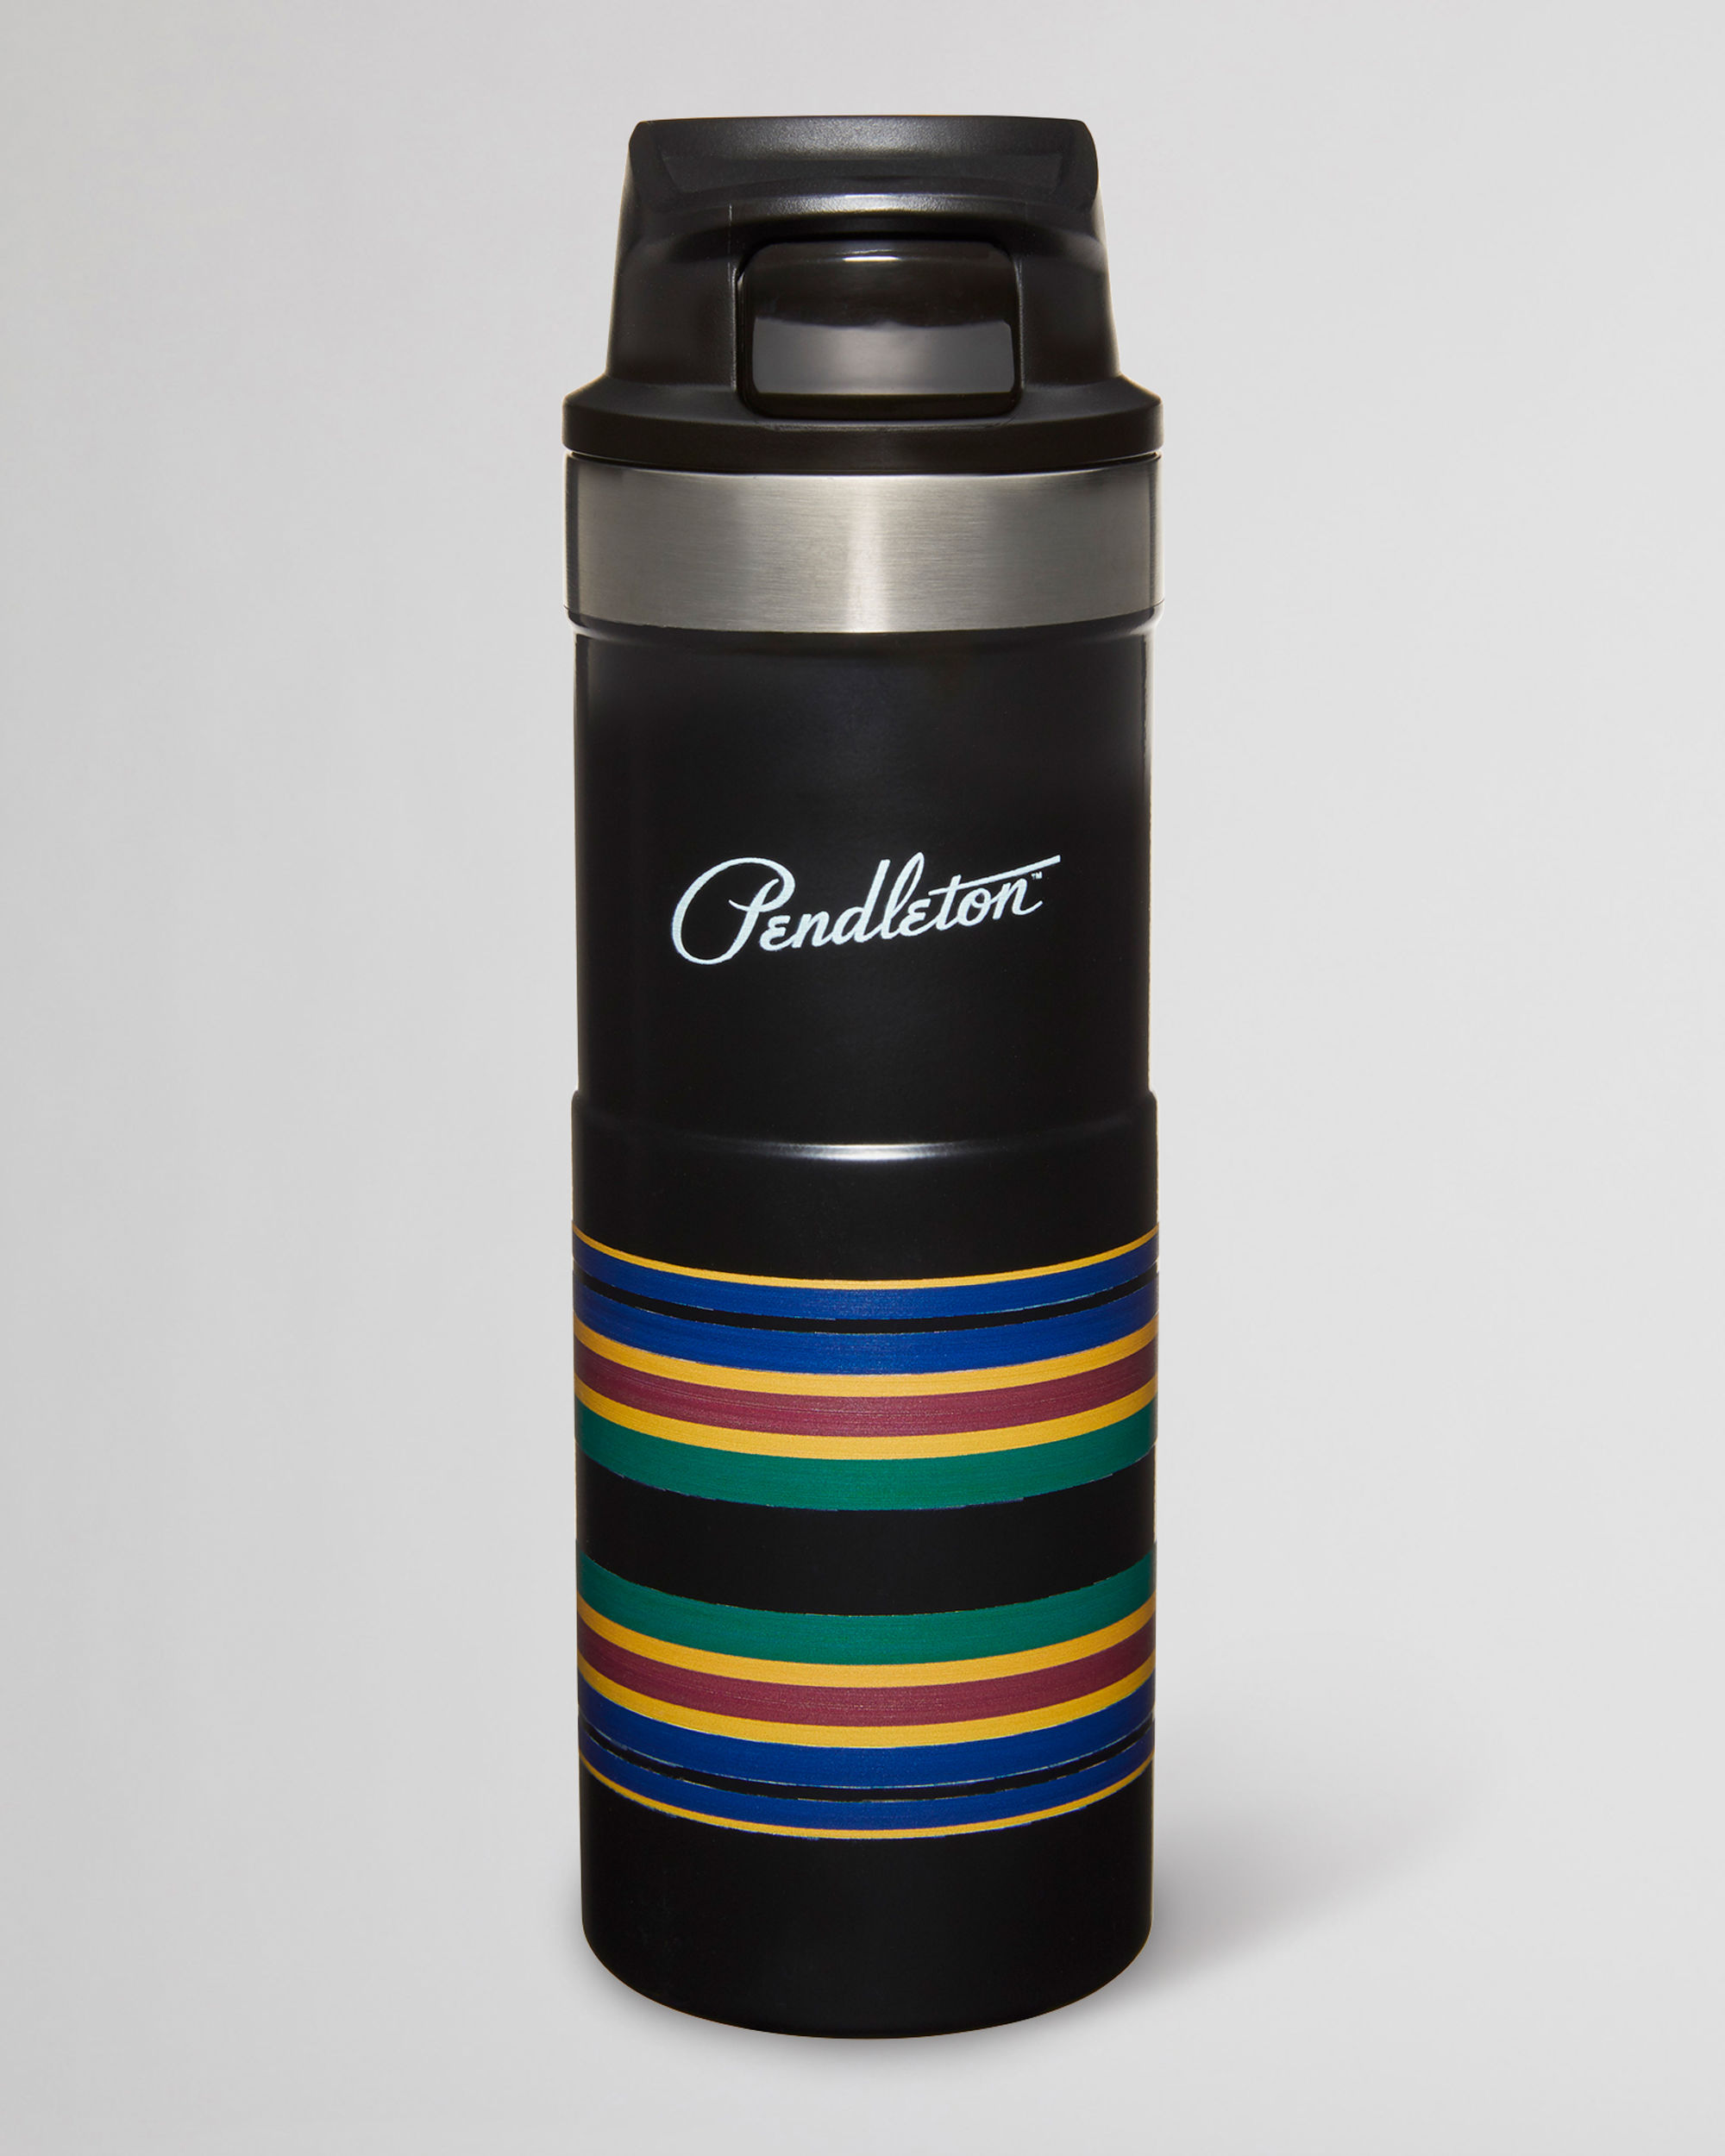 NEW! Stanley Pendleton Vacuum Bottle/Thermos - household items